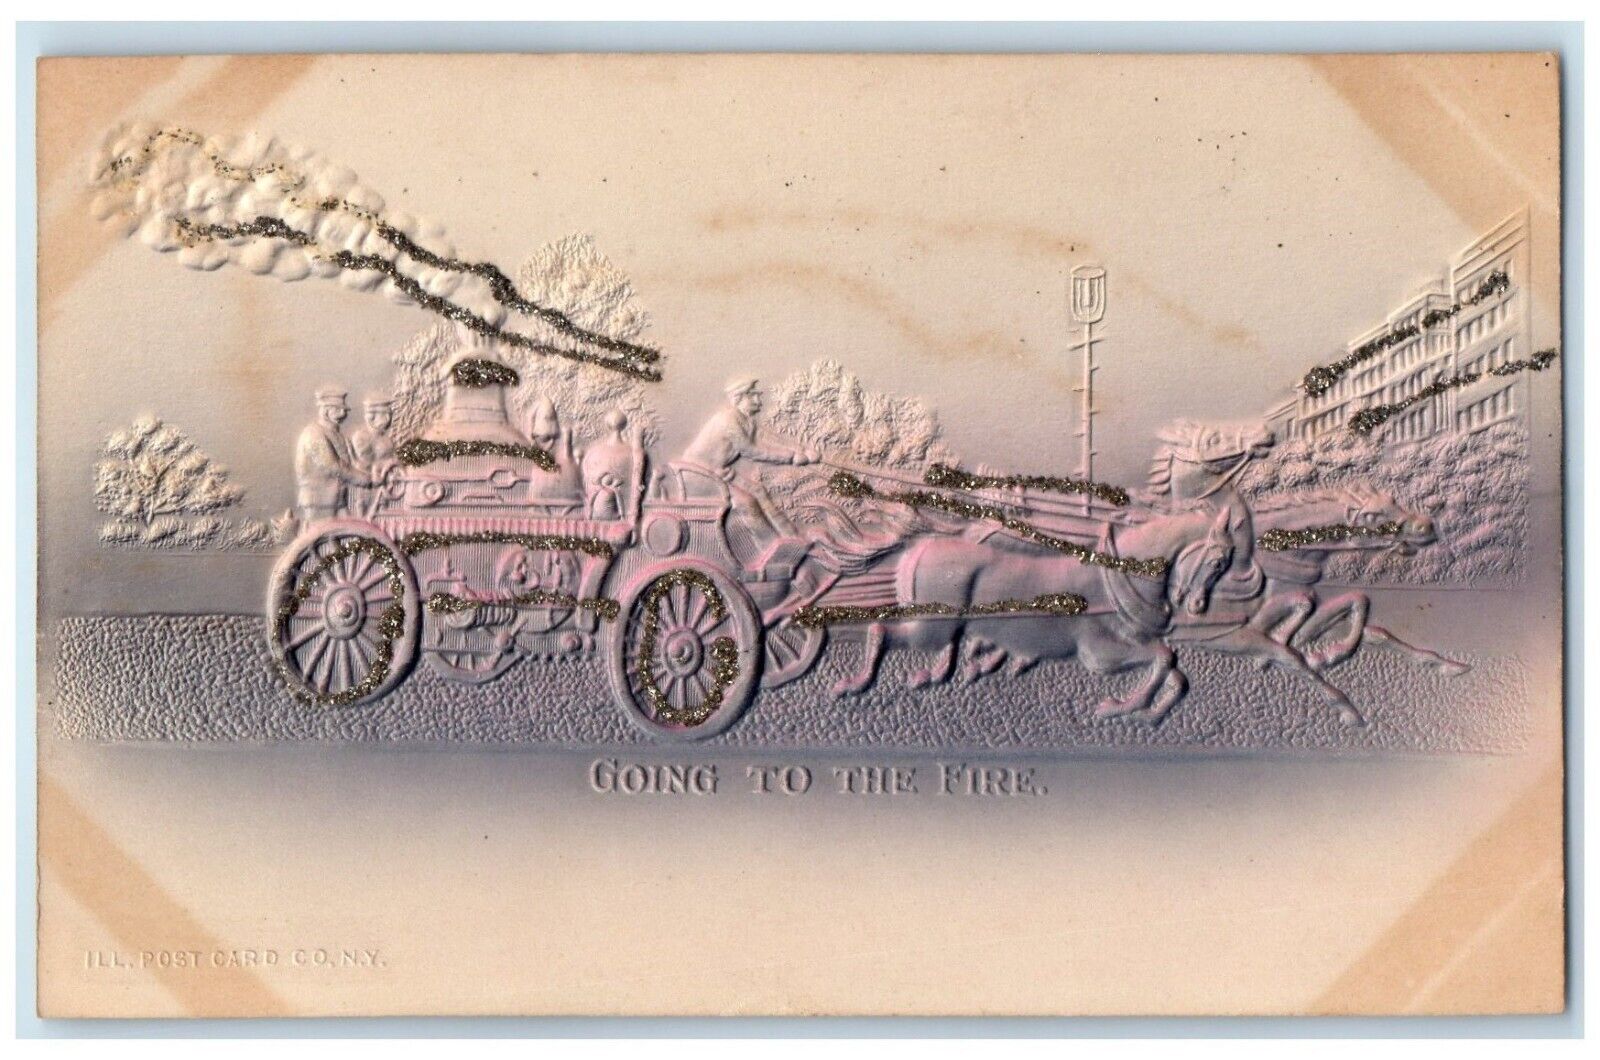 c1905 Firemen Going To The Fire Horse And Wagon Airbrushed Glitter Postcard